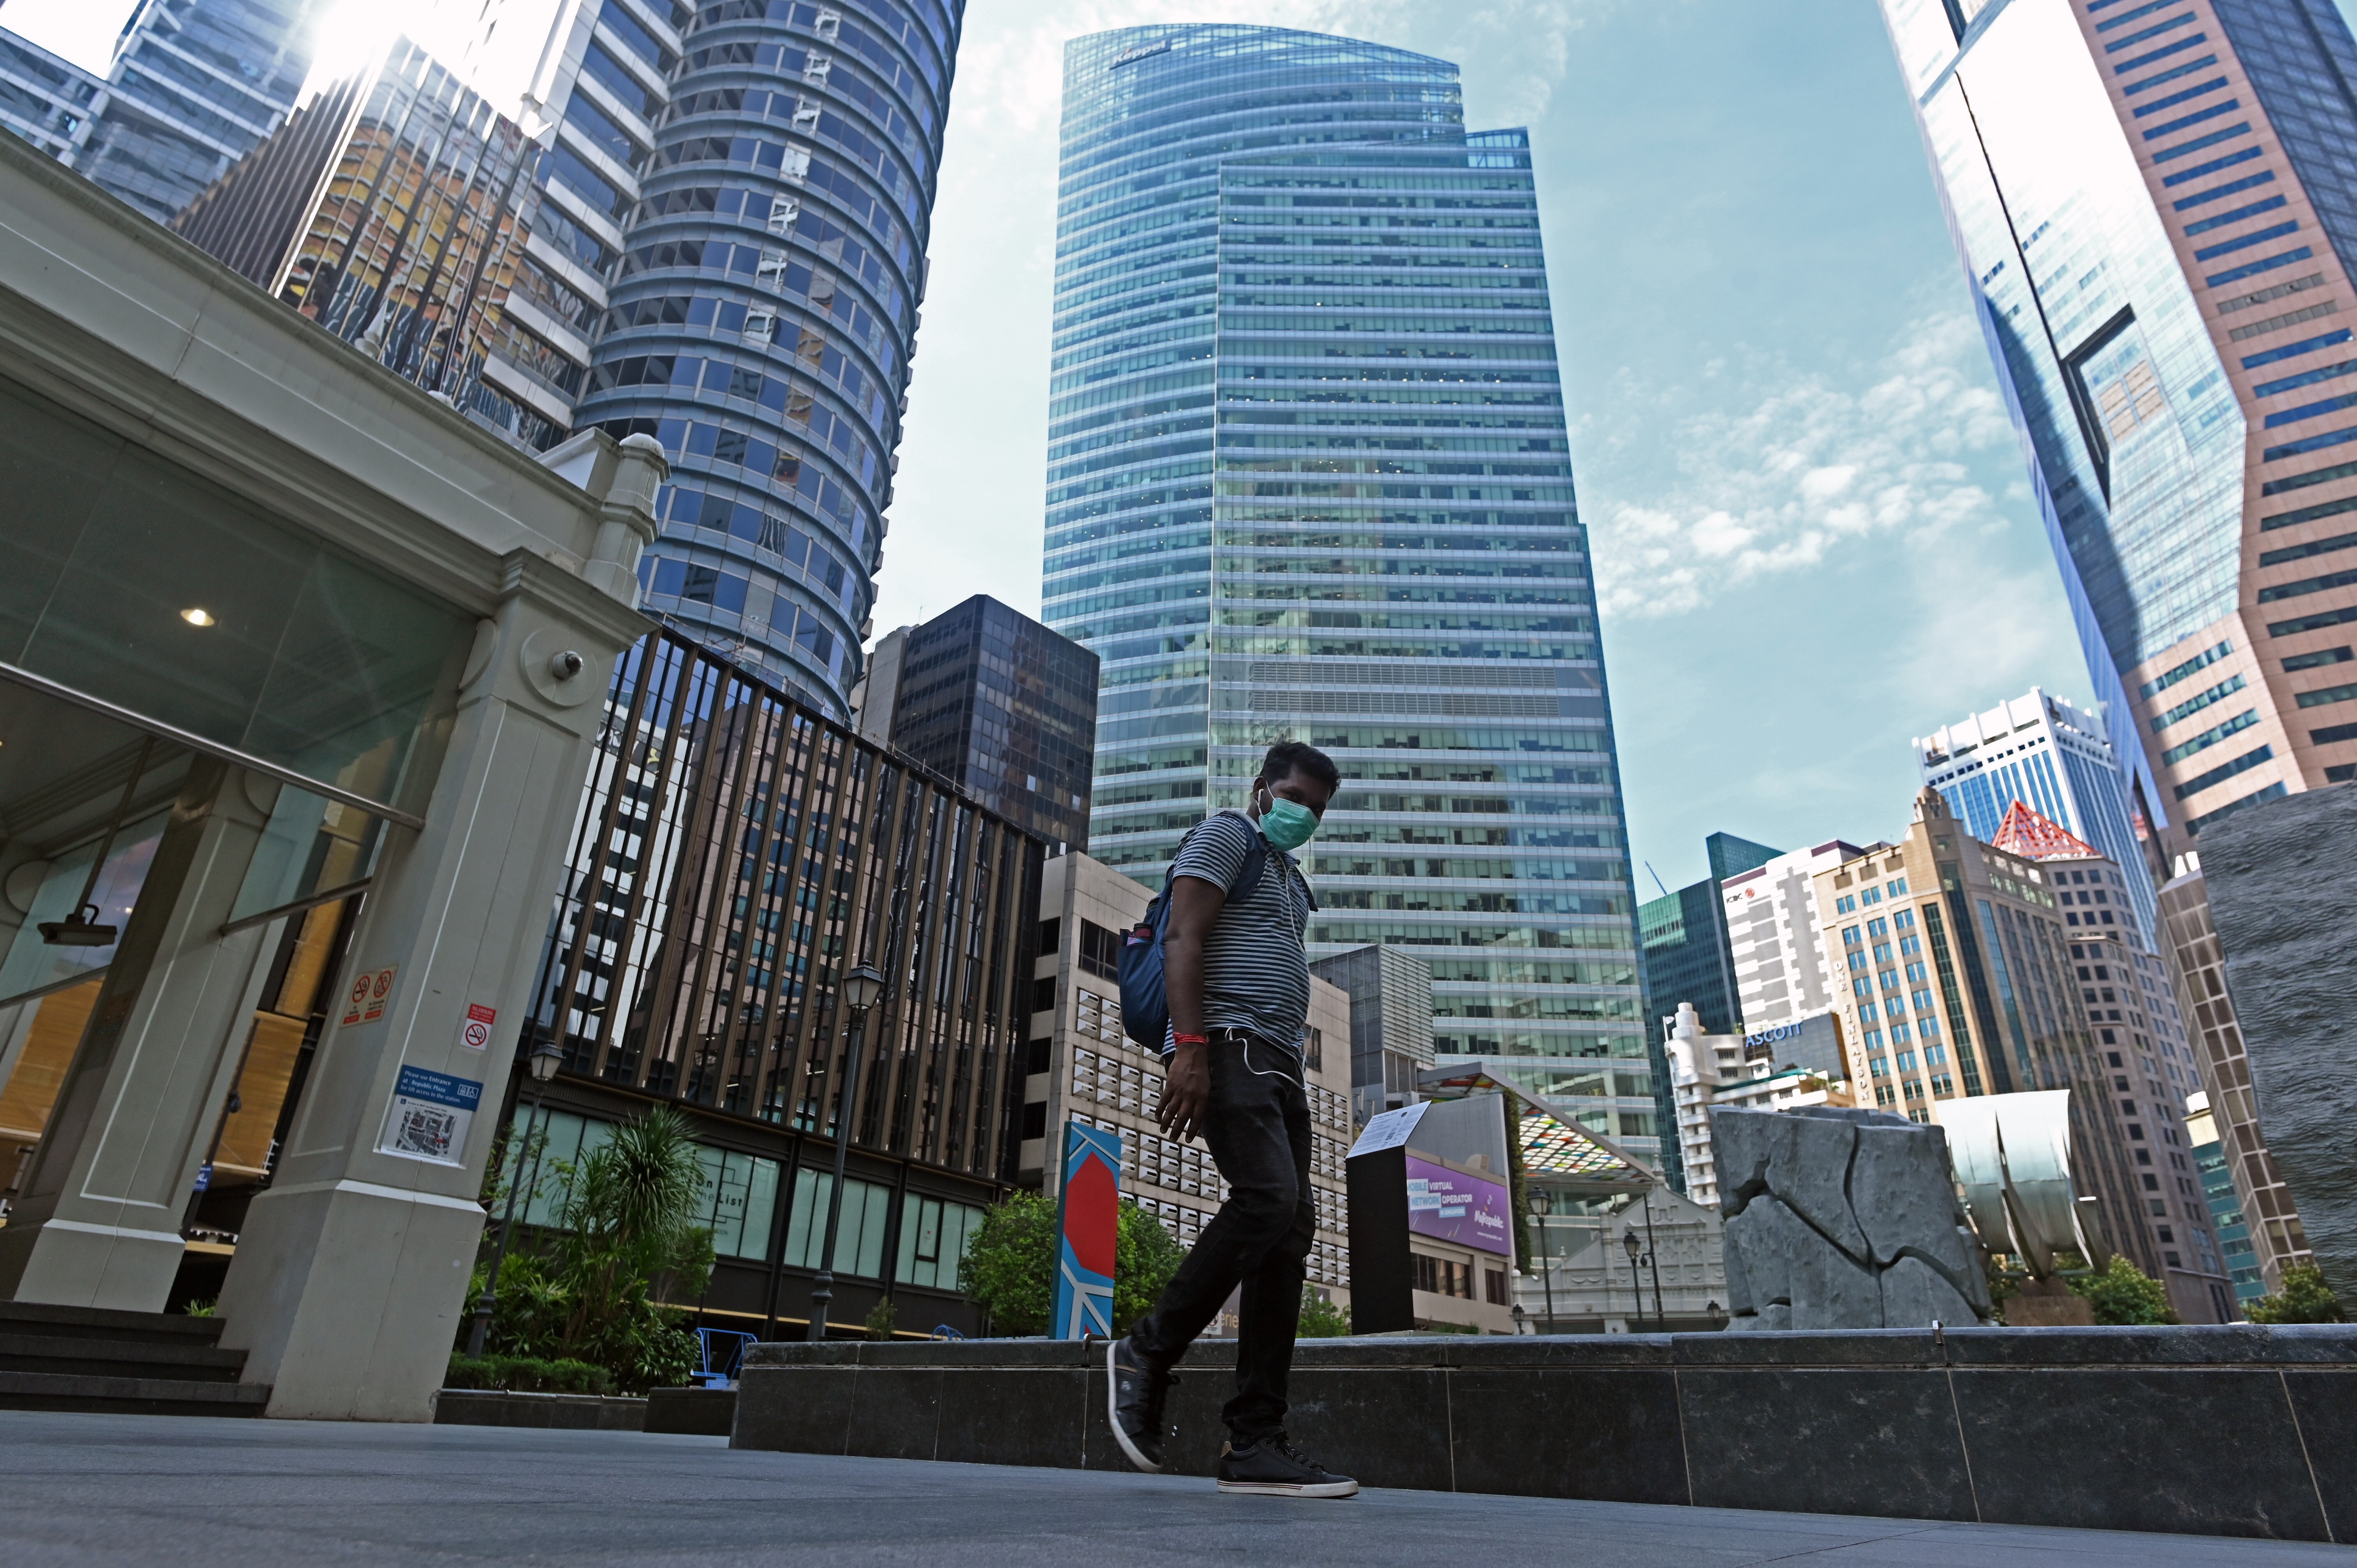 Singapore’s financial business district has seen a notable slowdown since the start of the Covid-19 pandemic, with businesses suffering from their inability to obtain loans from local banks. Photo: AFP